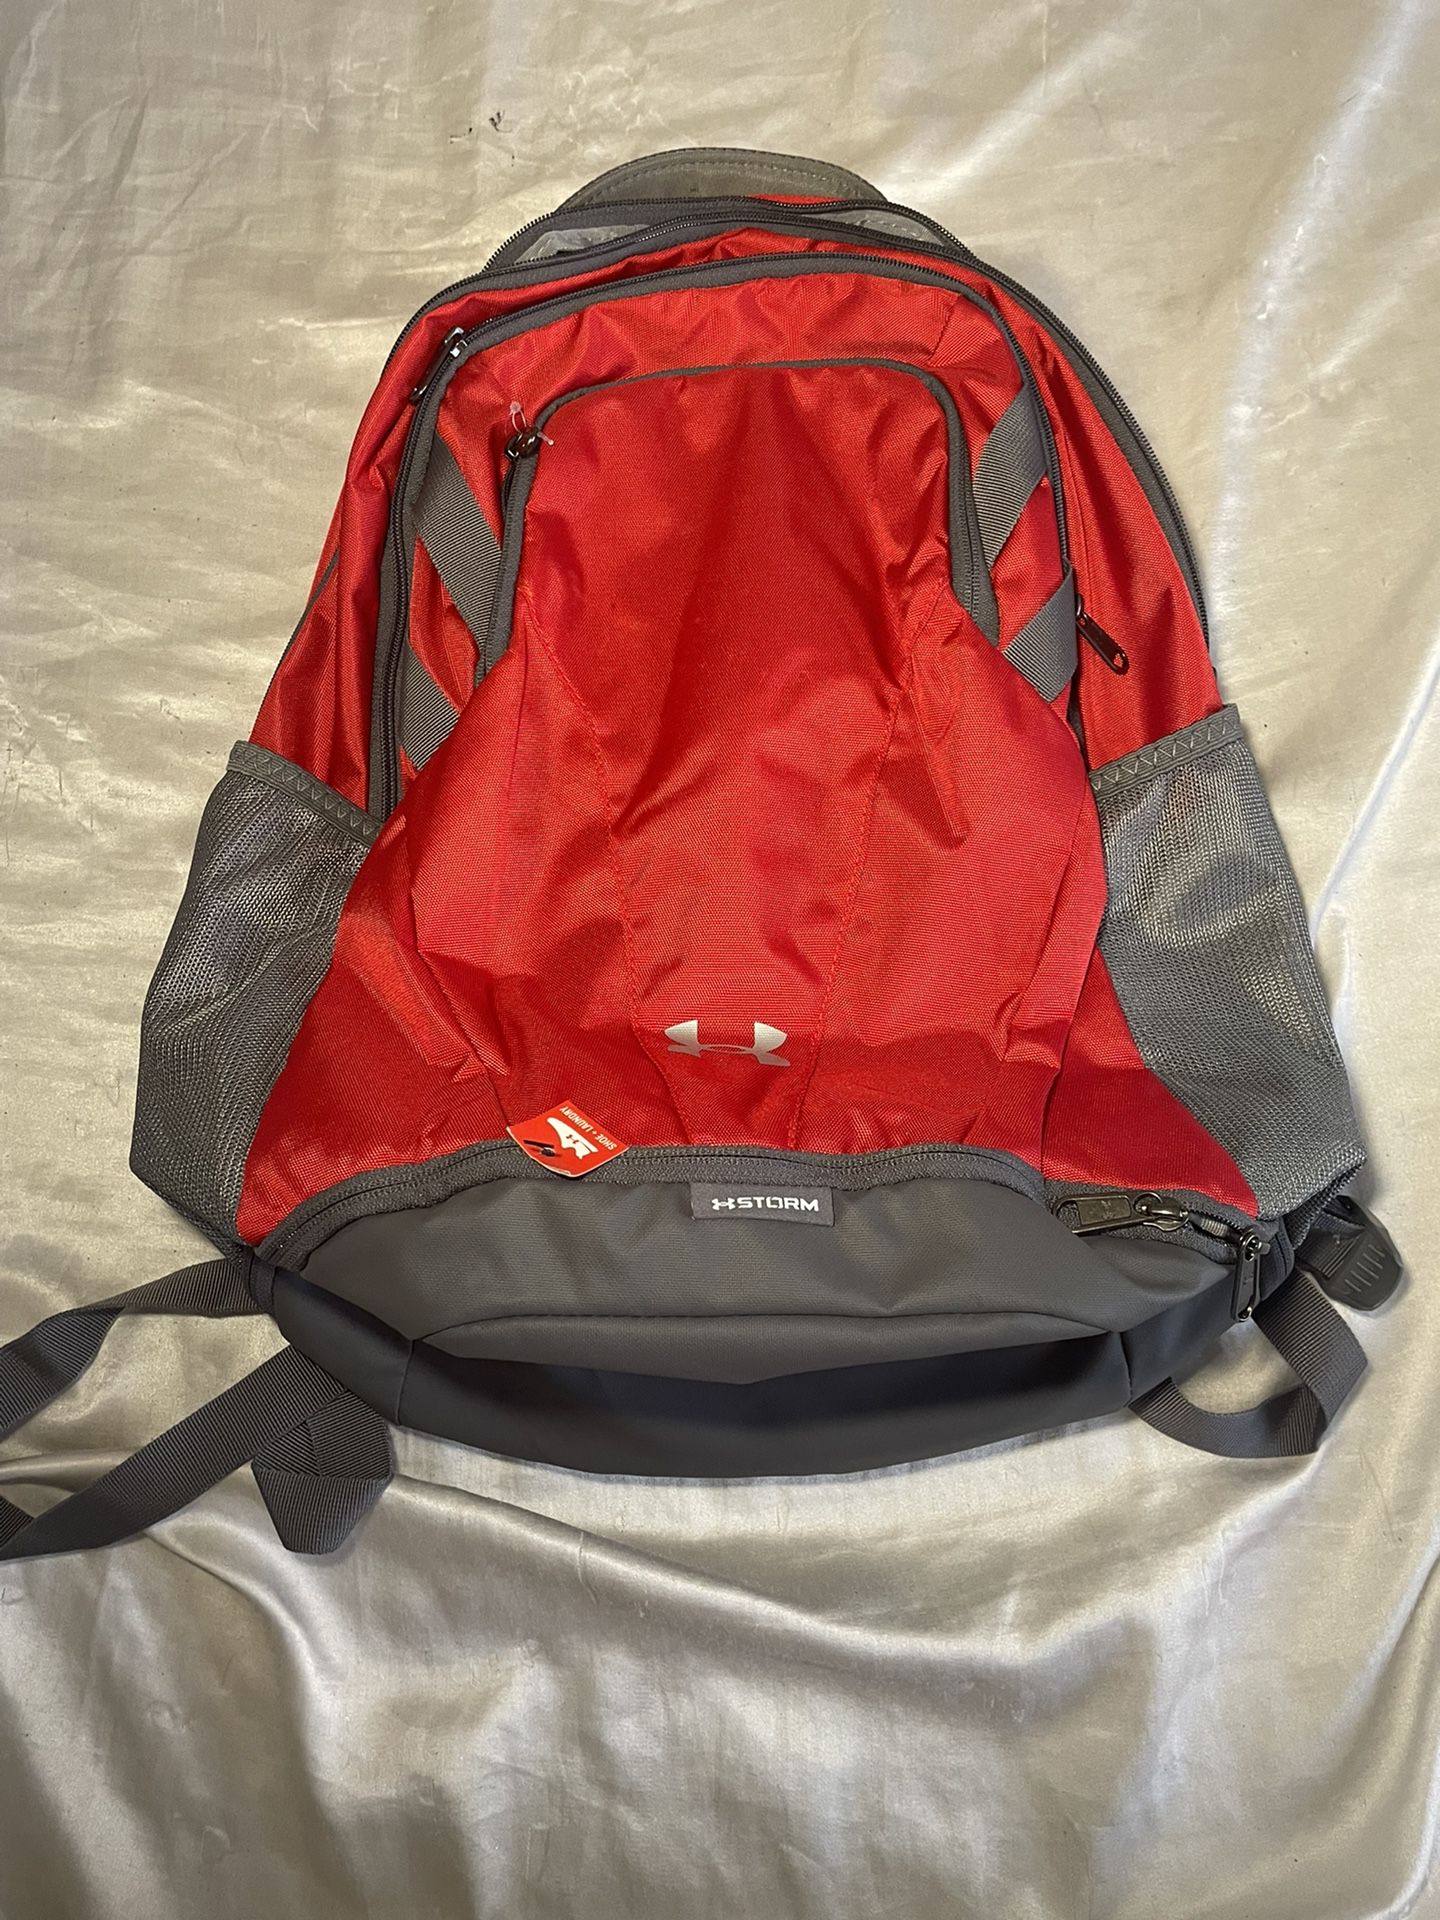 Brand new Under Armour back pack